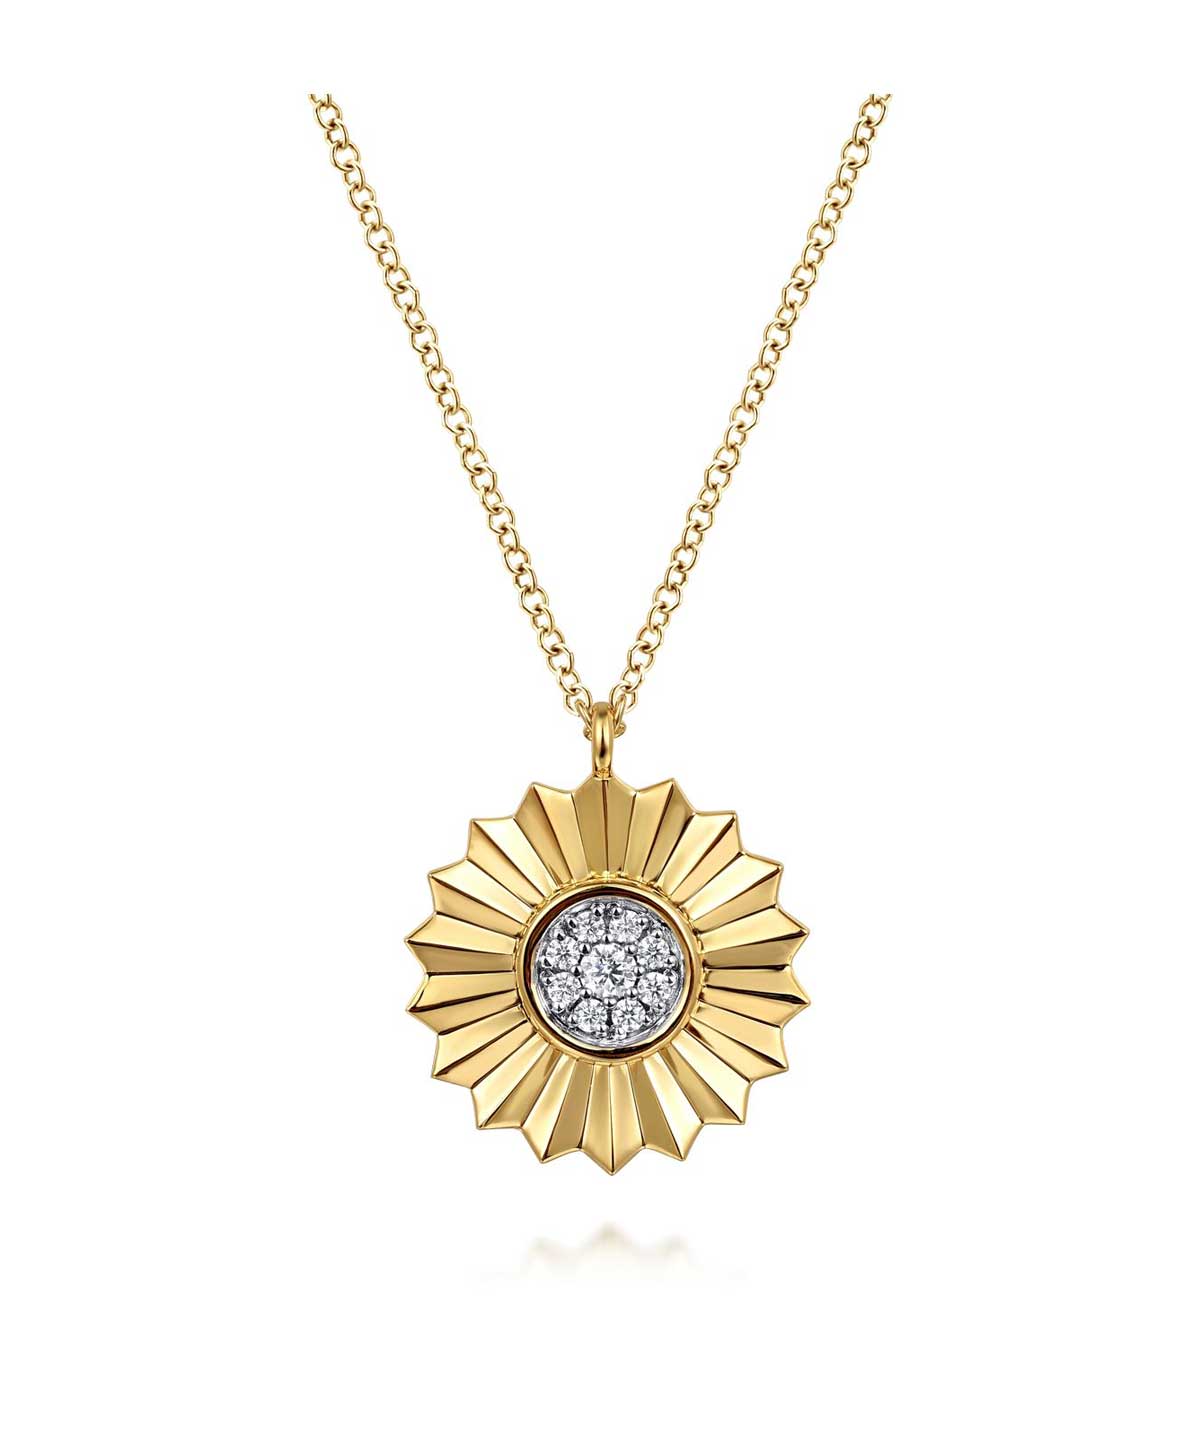 14K White and Yellow Gold Diamond Cut Pendant Necklace